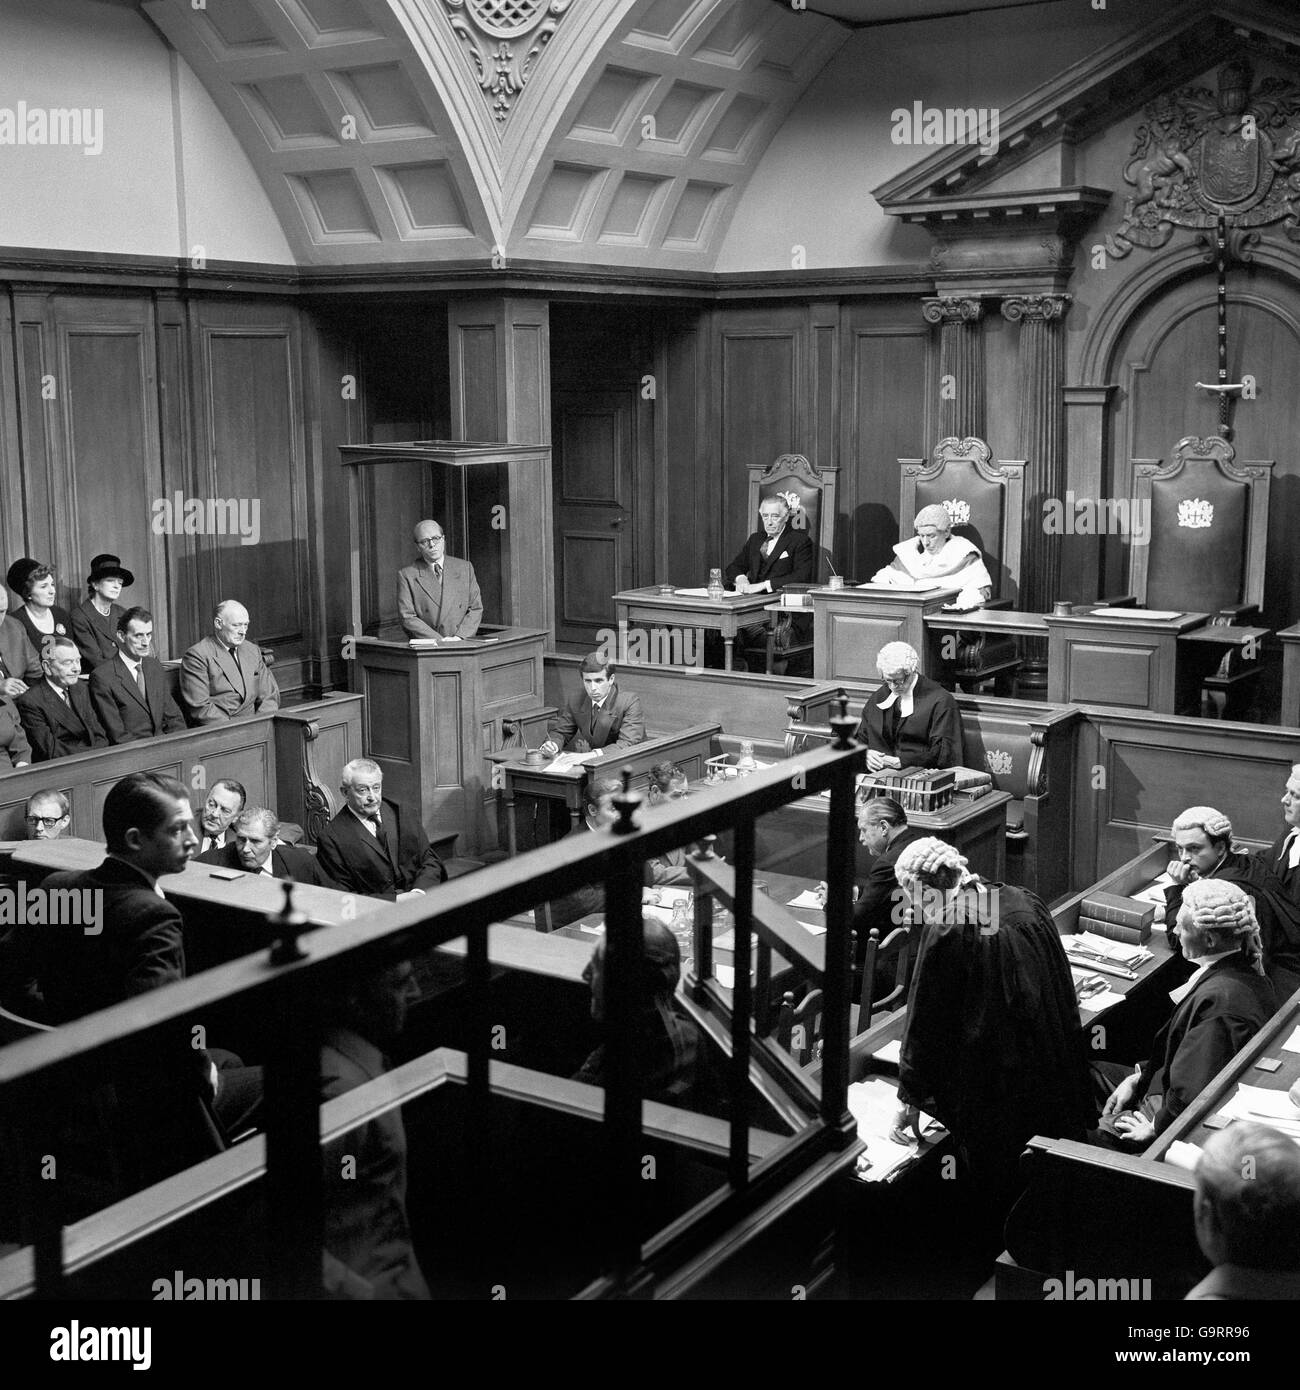 Trial of Timothy Evans - Film Reconstruction 146226-1 16/6/1970. Trial of Timothy Evans - Film Reconstruction 146226-1 16/6/1970 Stock Photo